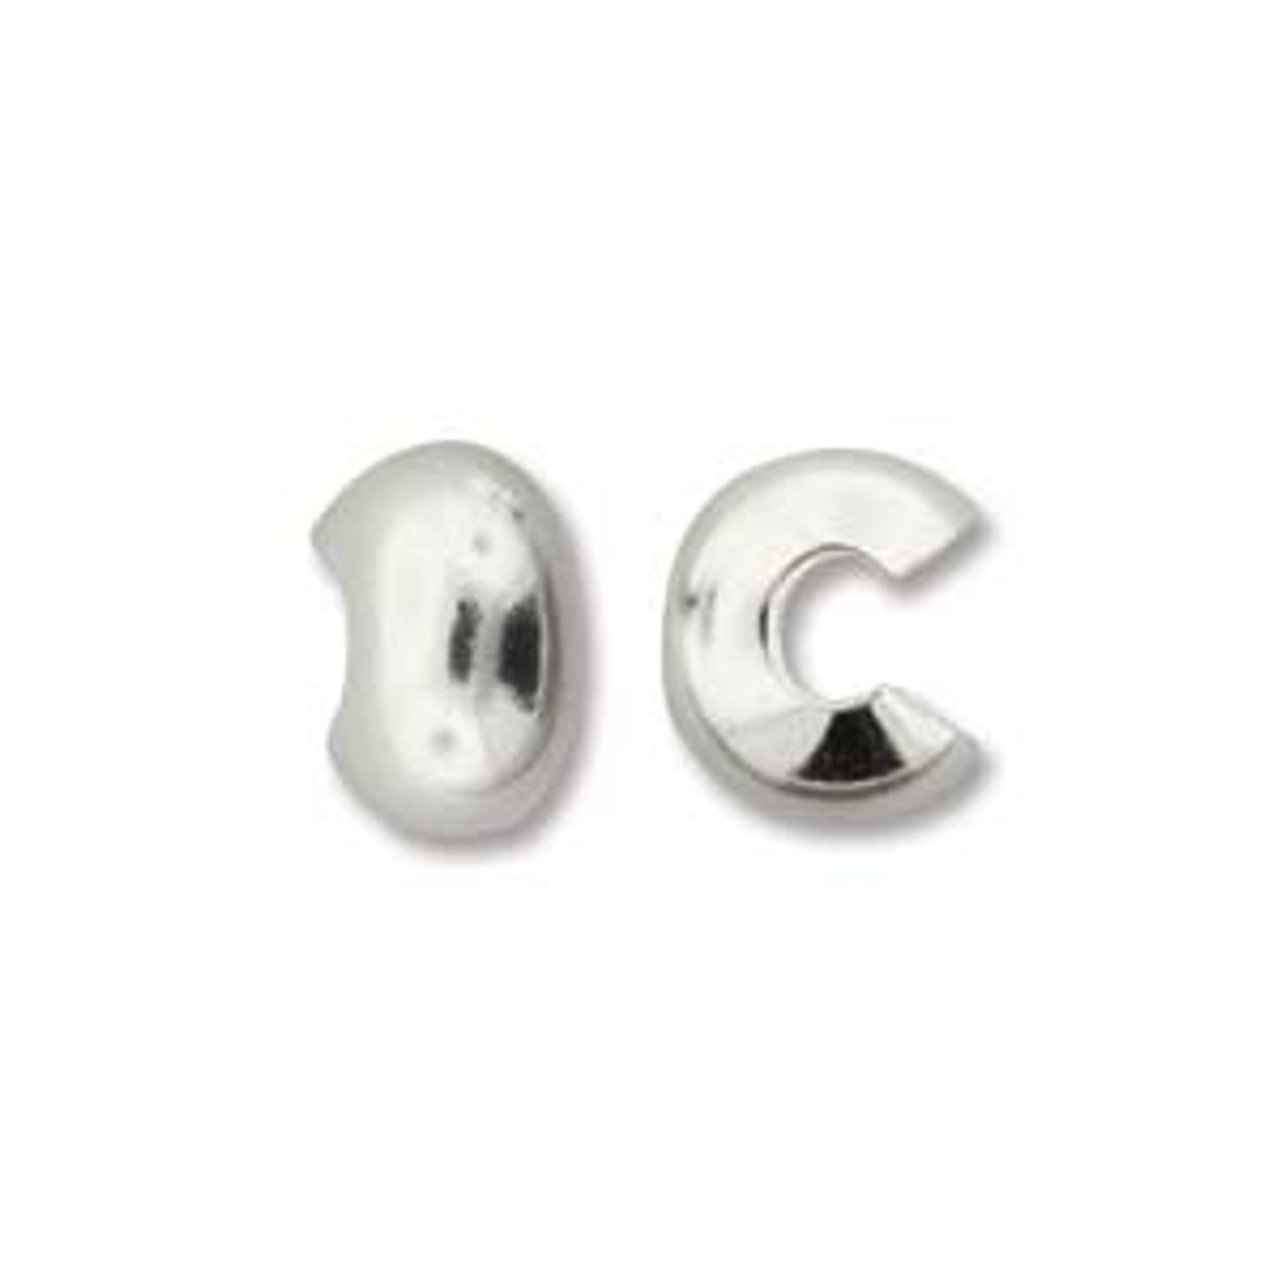 Crimp Bead Cover, Sterling Silver, 4.8mm (Qty: 2) - Jill Wiseman